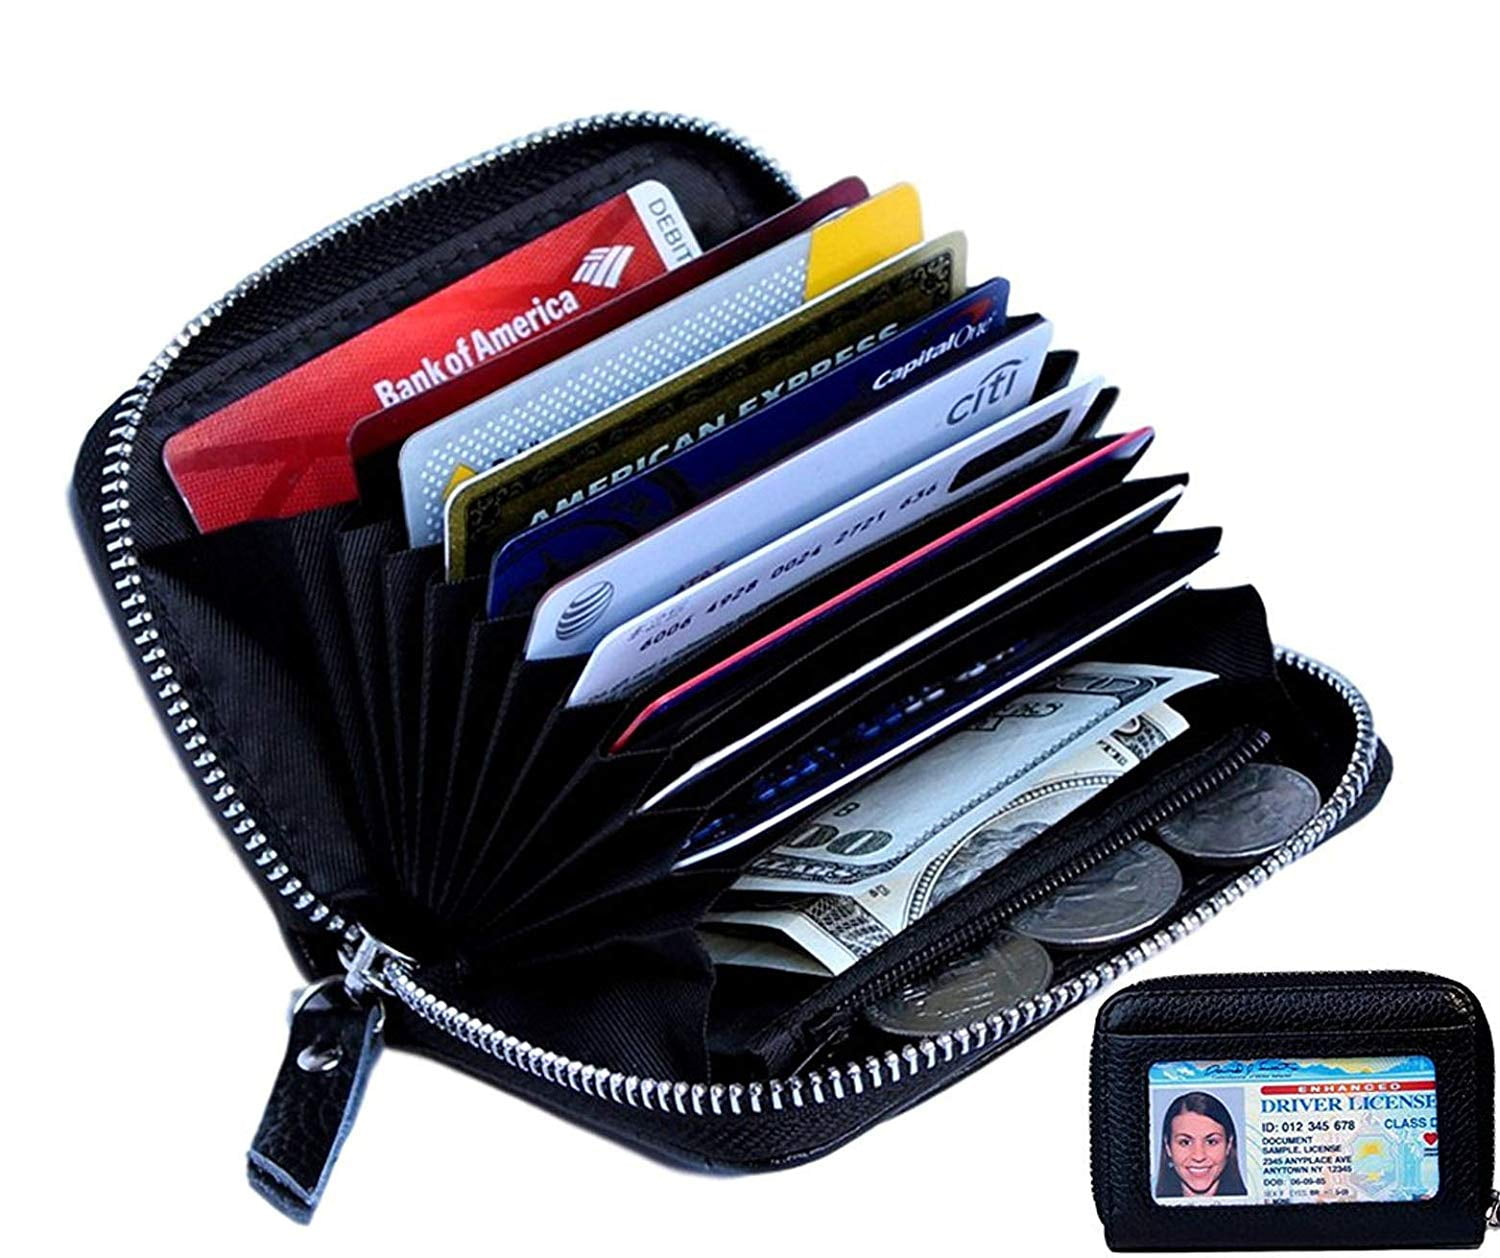 Wrist Strap Pen Holder Picture Window The RFID Wallet Includes Organizer Pockets for Credit Cards RFID Wallets for Women Cash Black Receipts Passport Zippered Pocket and Theft Protection.